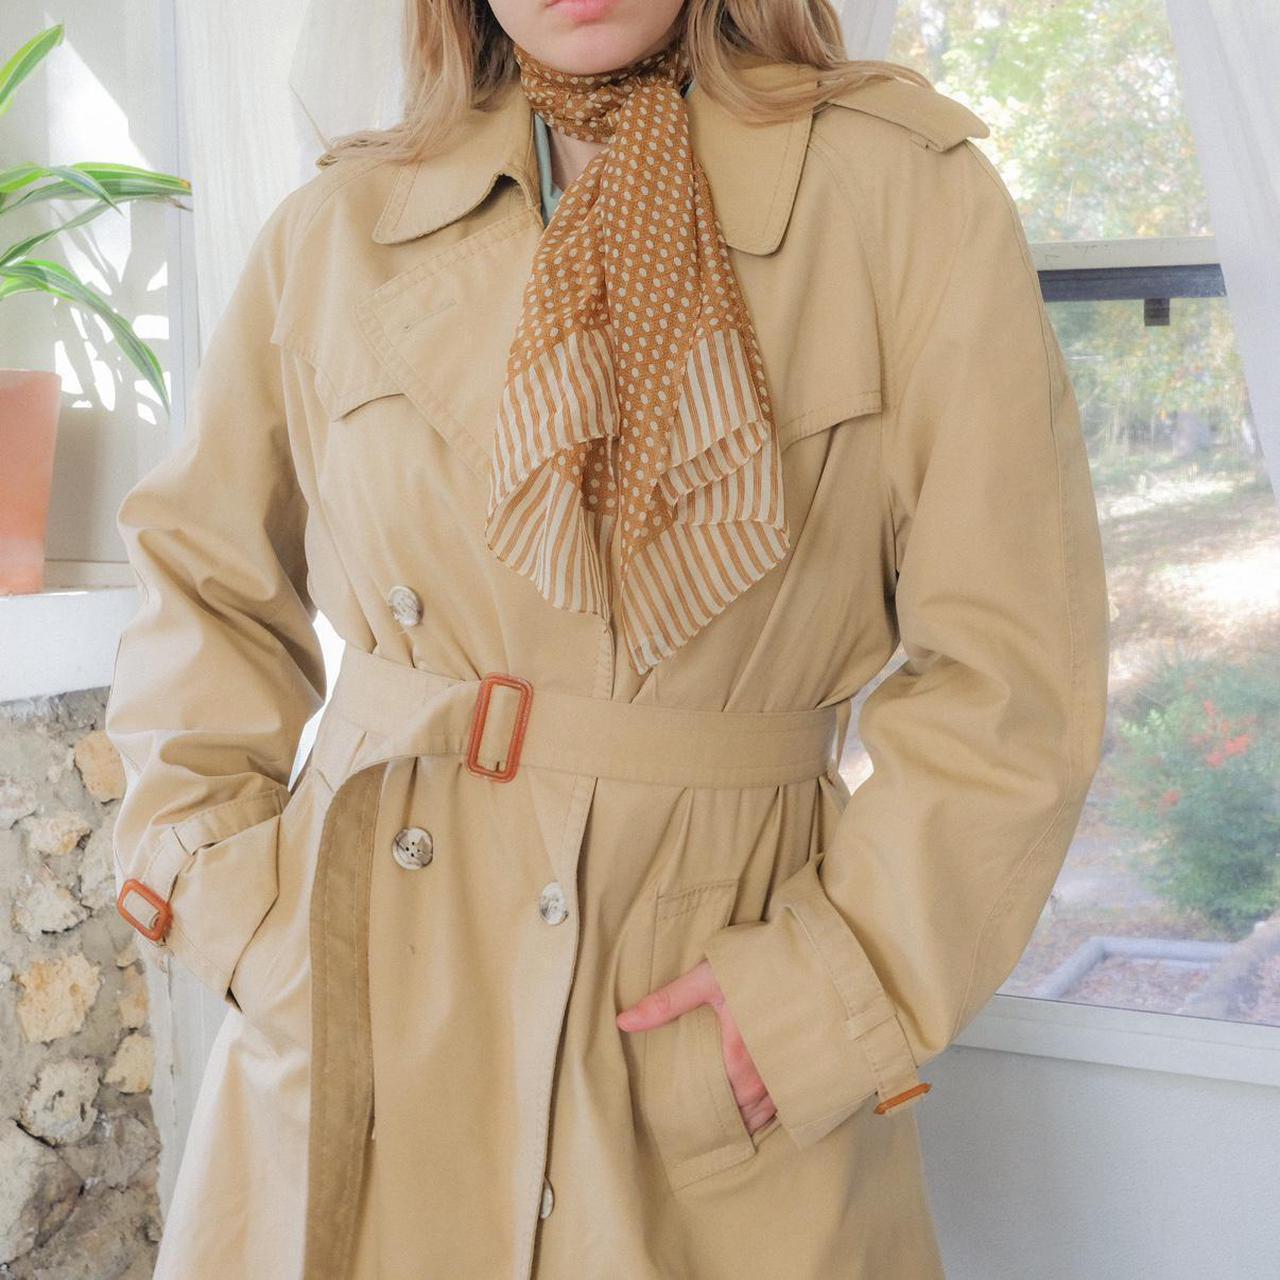 Product Image 2 - Vintage tan trench coat. Feels